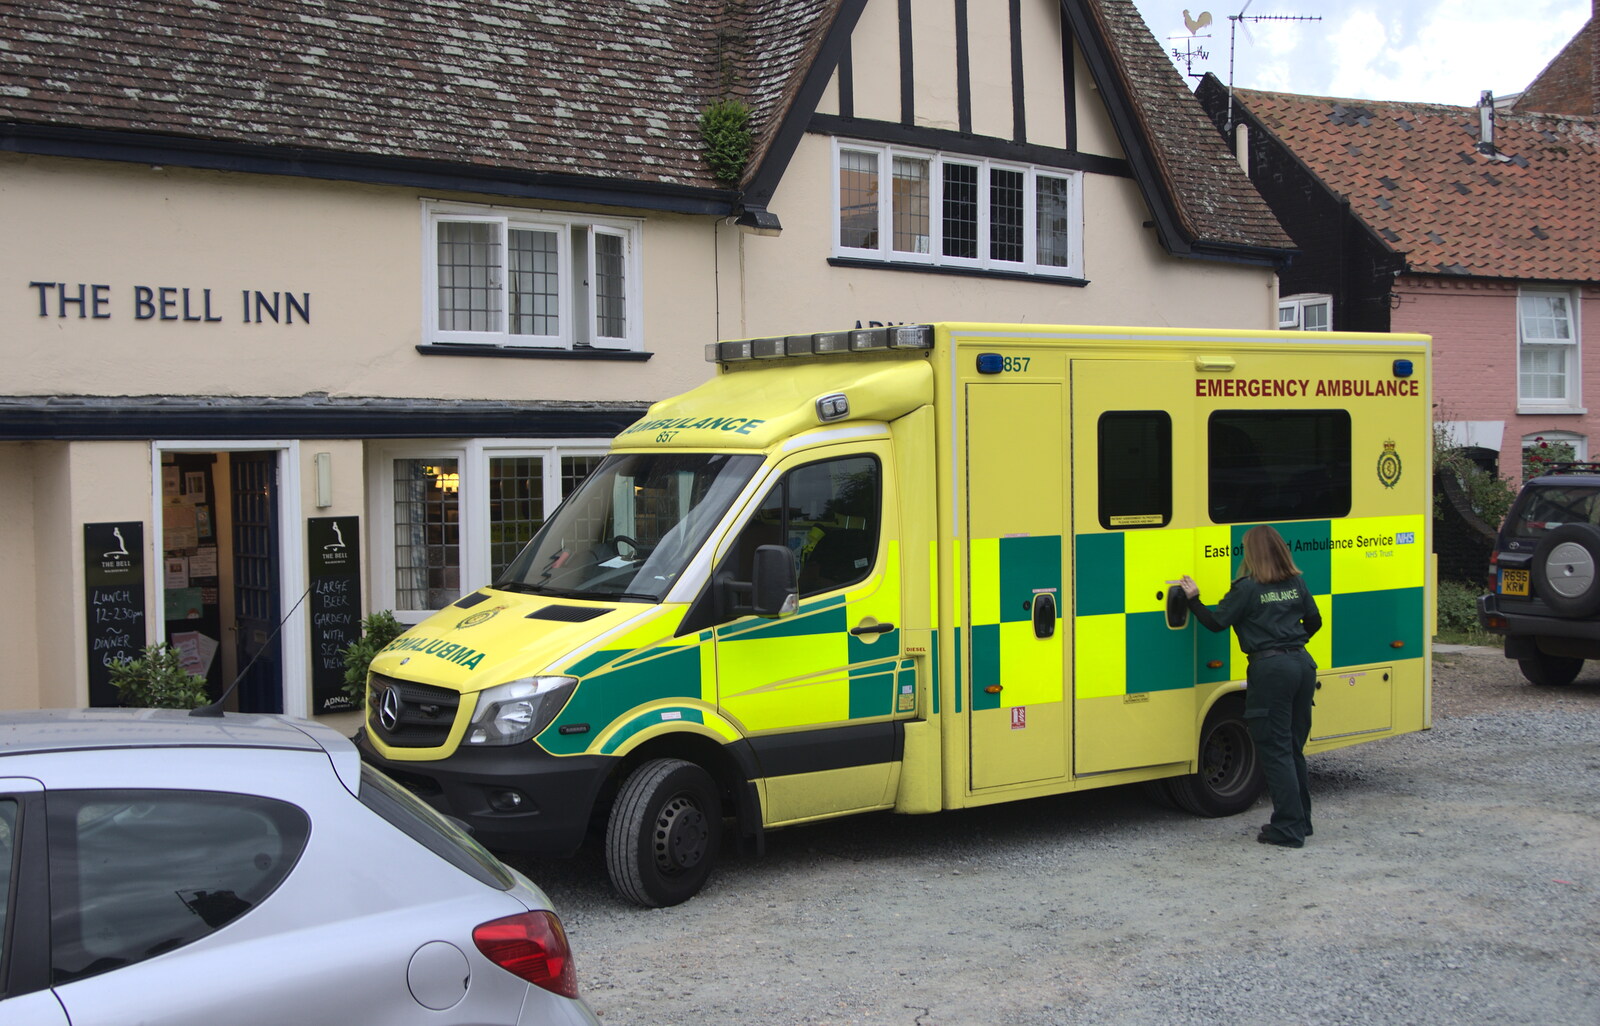 The ambulance outside the Bell from The Danger of Trees: A Camping (Mis)adventure - Southwold, Suffolk - 3rd August 2015